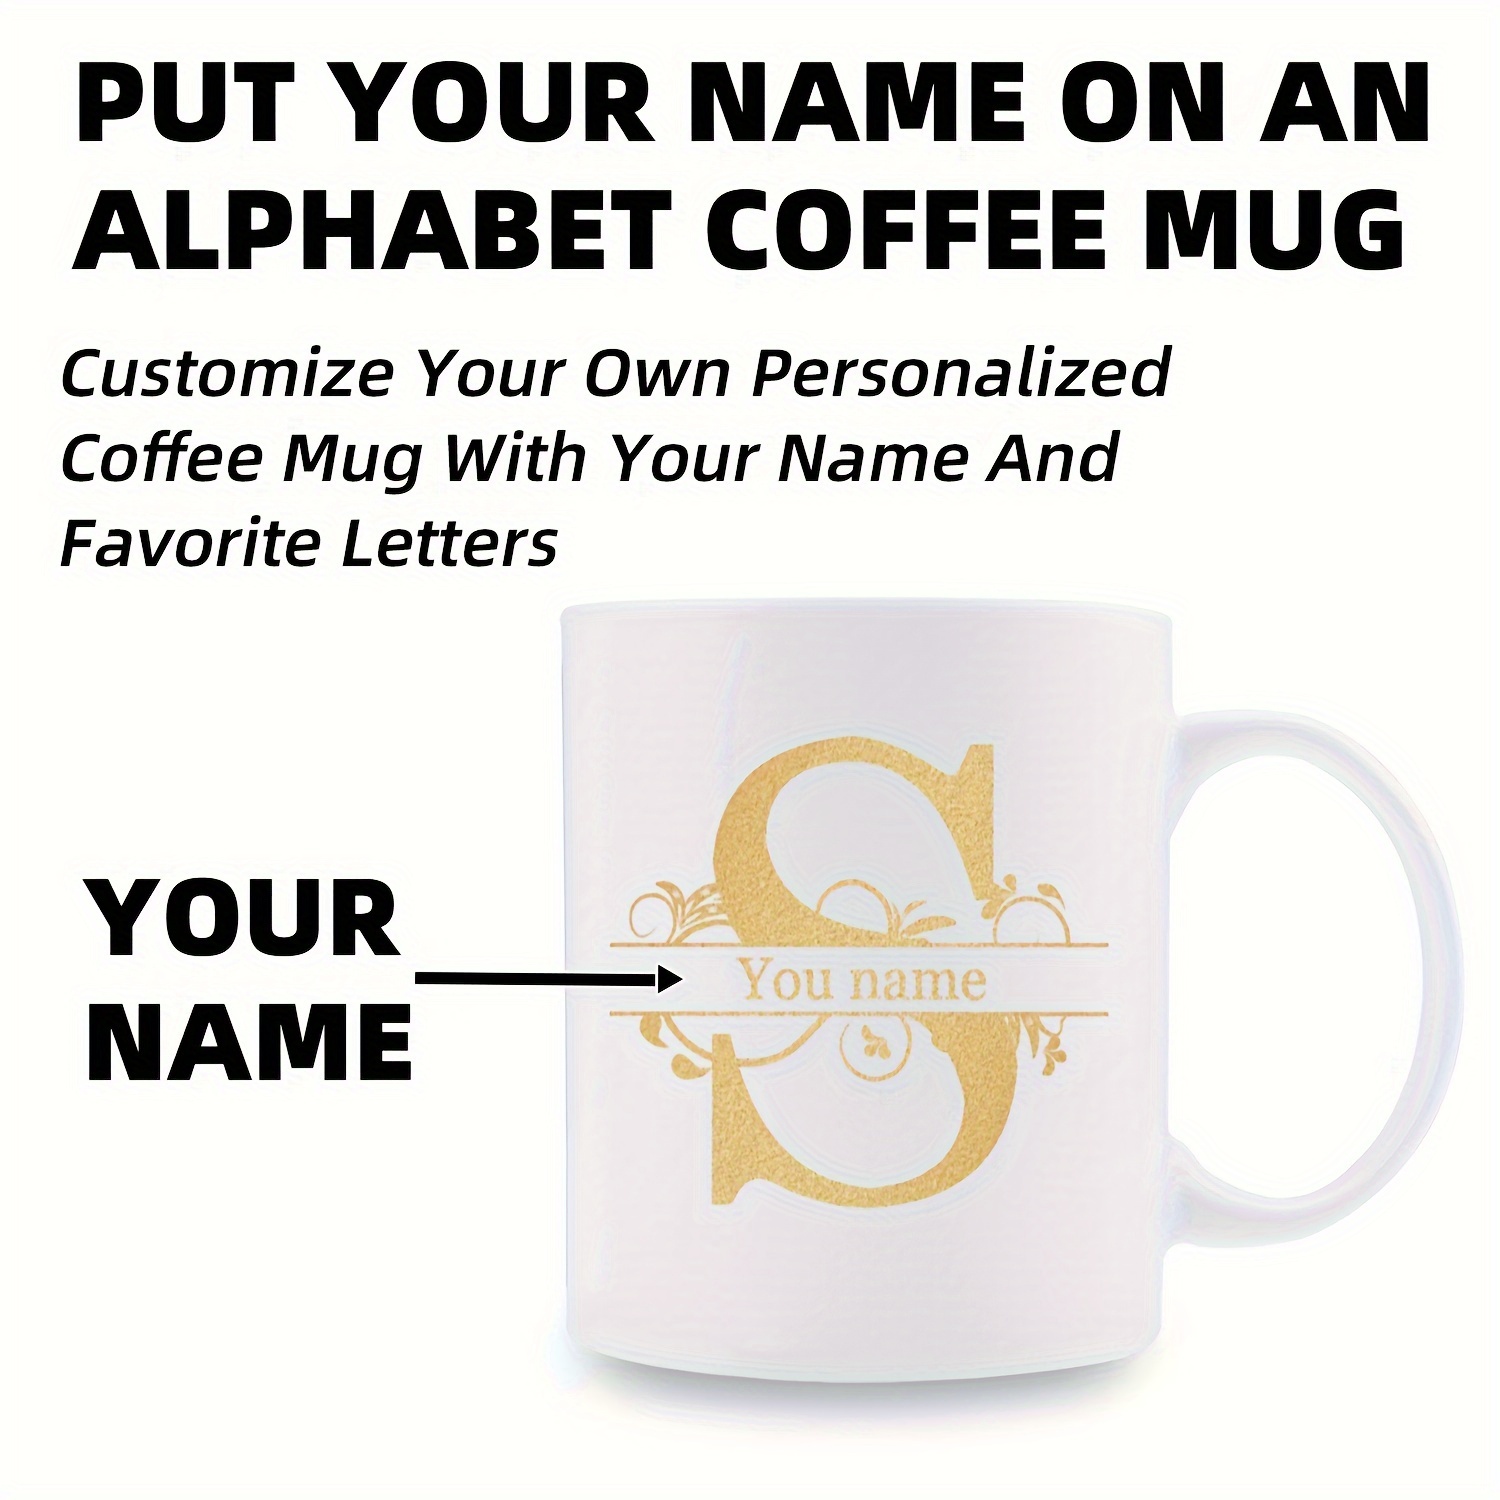 Personalized Coffee Mug - Design Custom Cup with Photo Text and Logo  Novelty Customized Gifts for Men and Women Tea Cup Taza Personalizada 11oz  Both